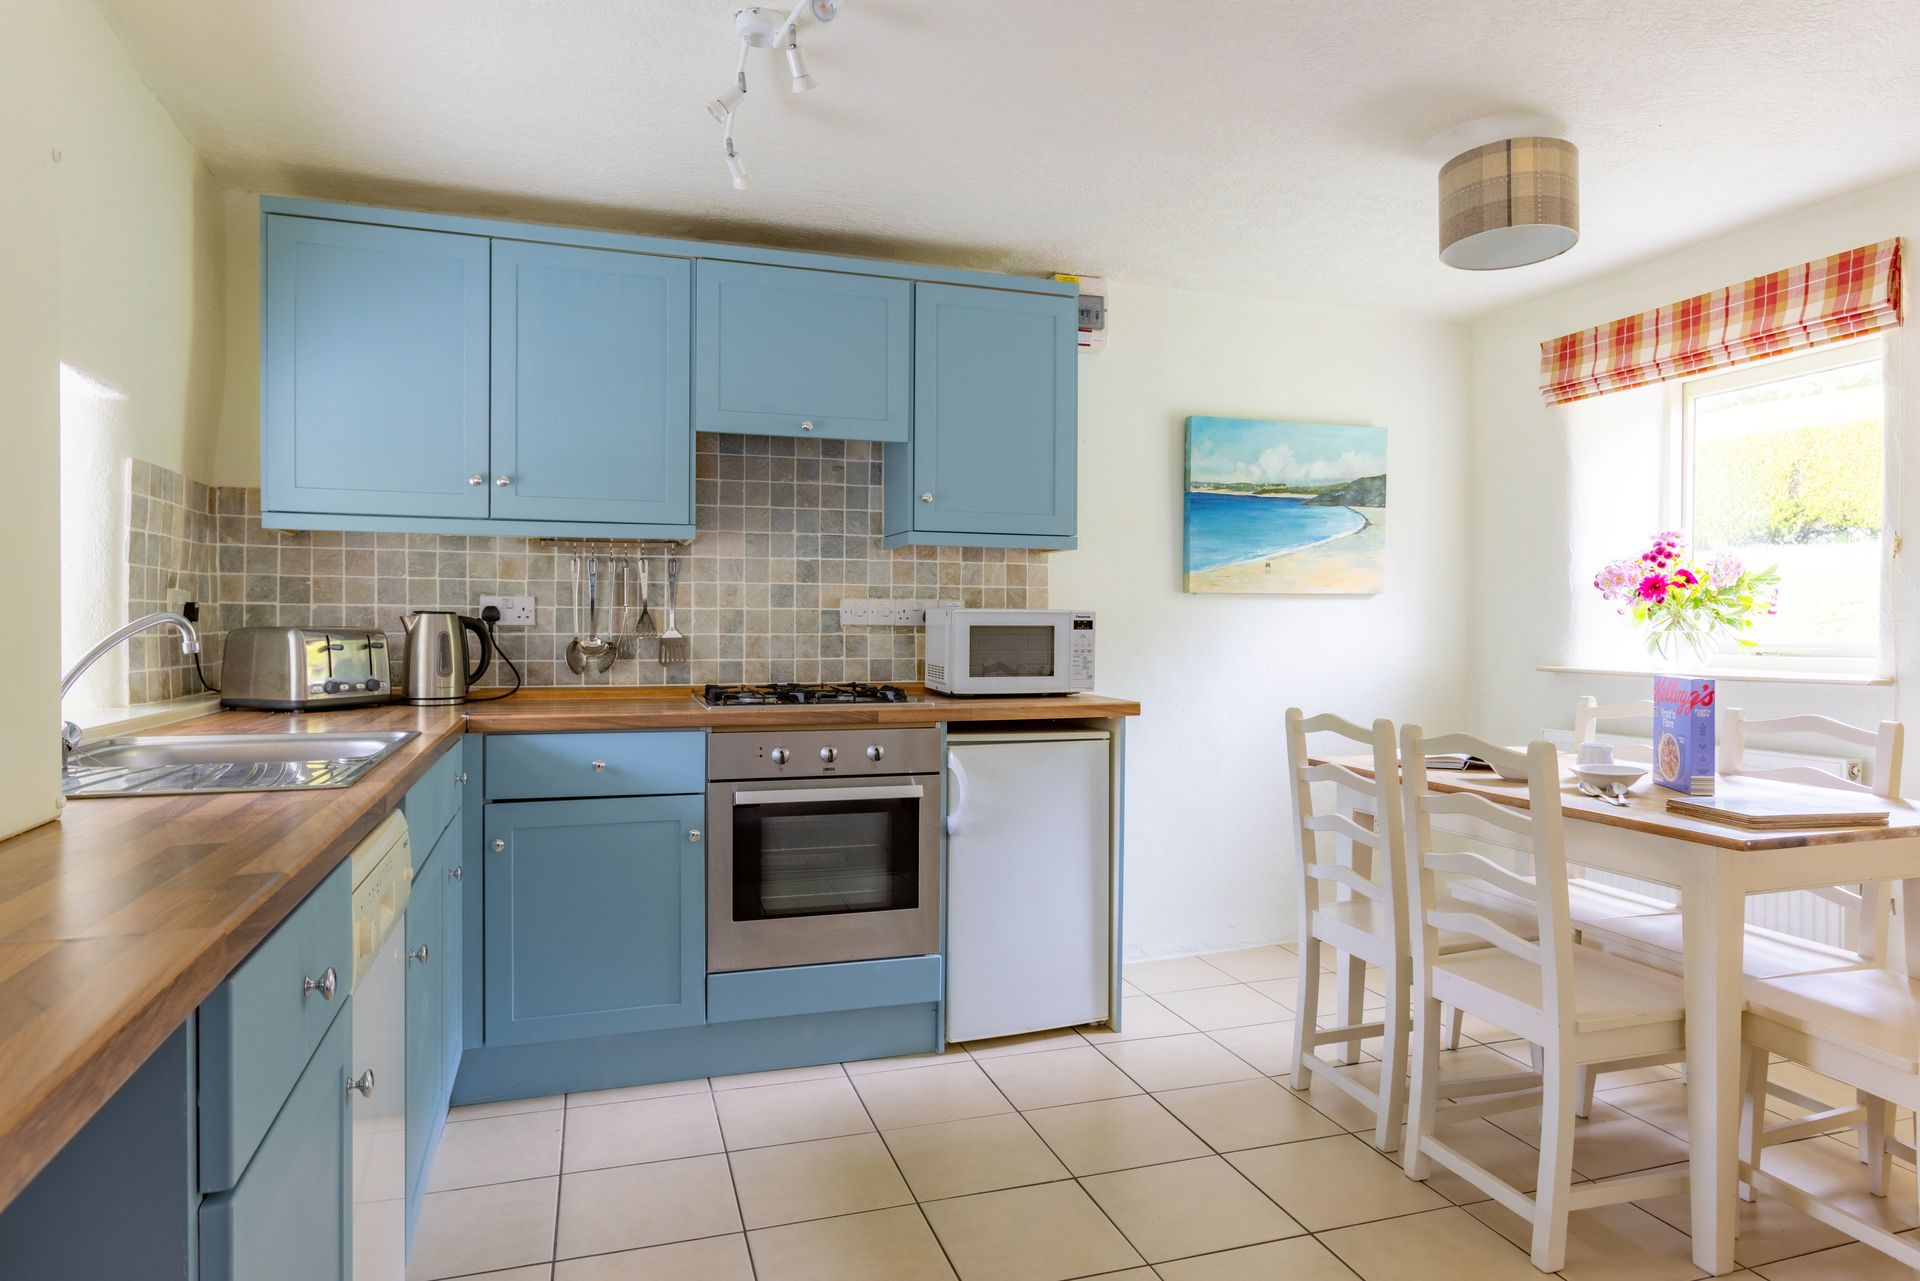 Luxury Holiday Cottage For Rent In Bude Cornwall Puffin Cttage Broomhill Manor